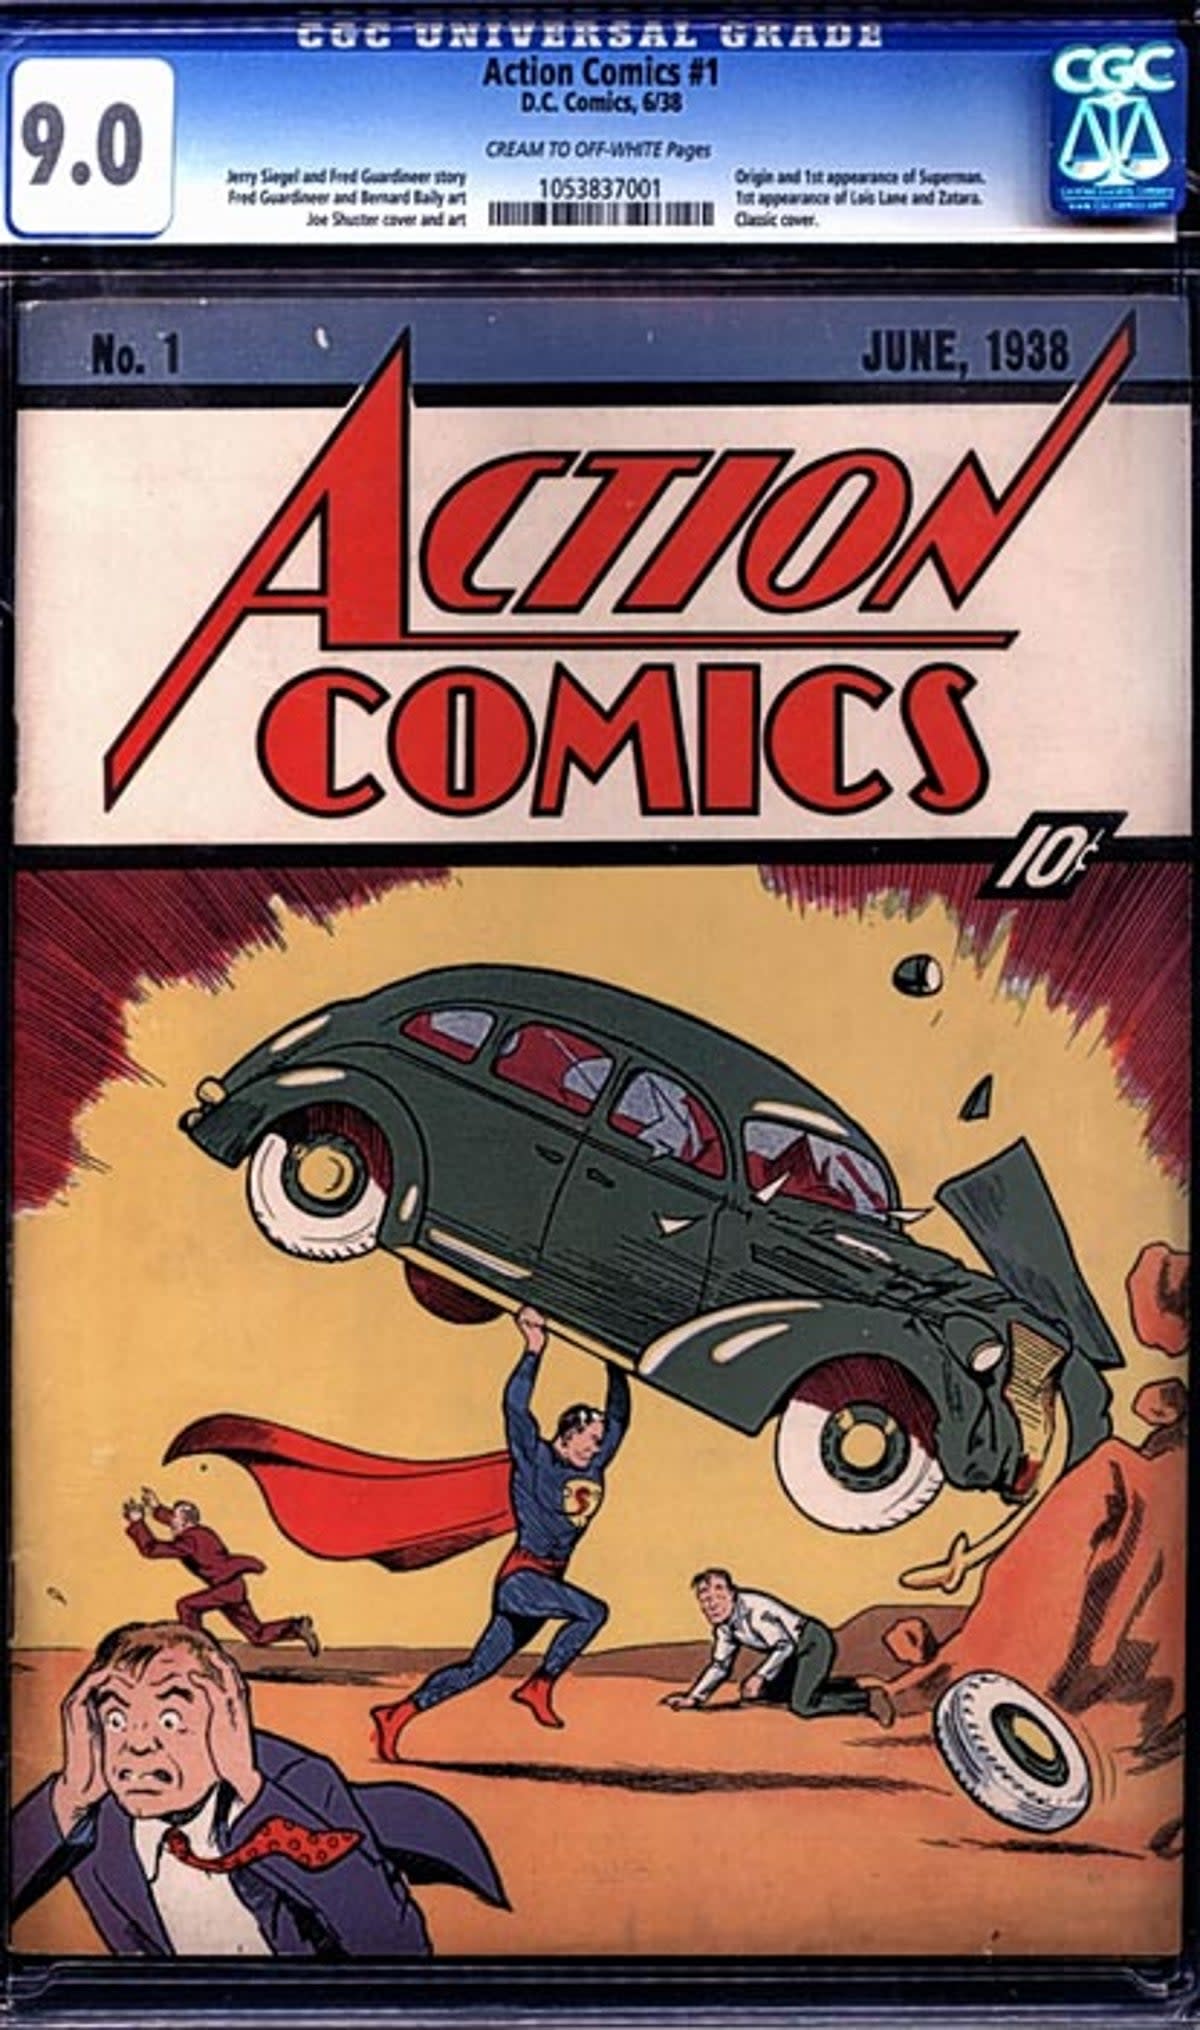 Auction: the 1938 edition of Action Comics featuring Superman